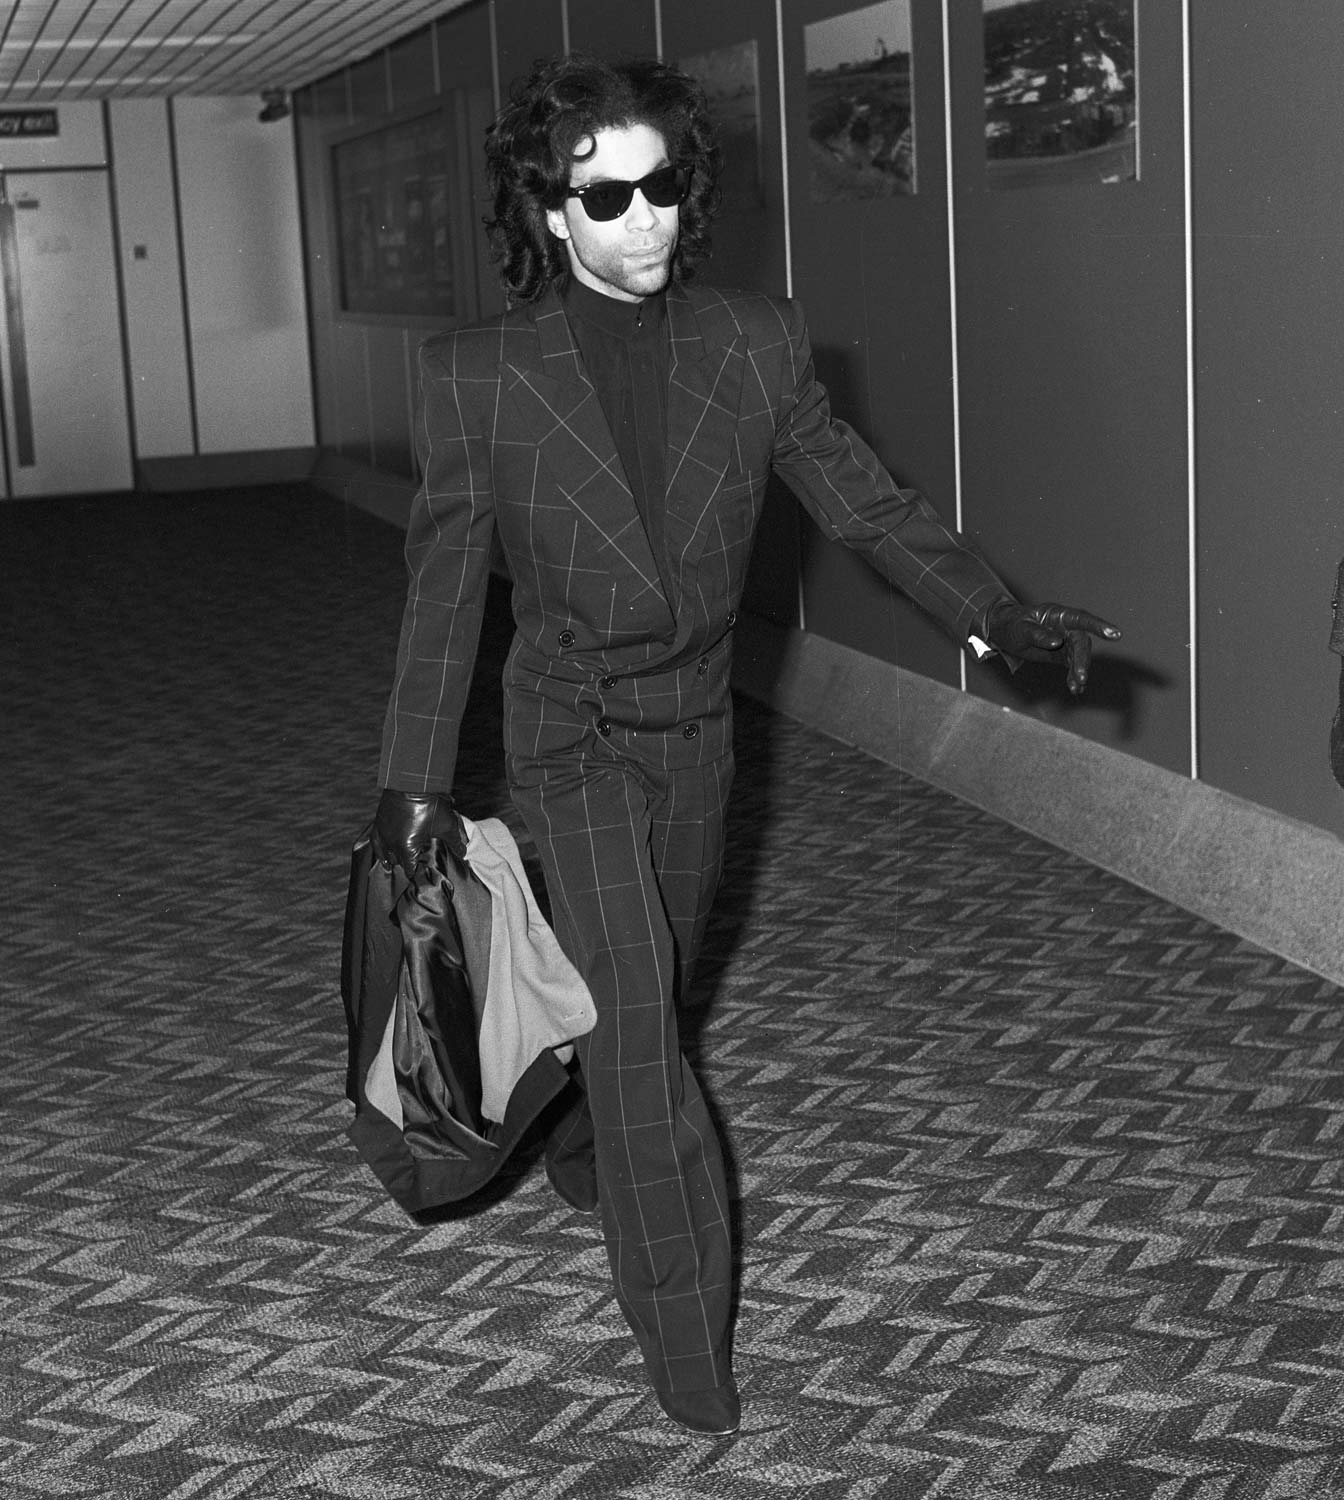 Prince arriving at Heathrow airport in London, 1989.